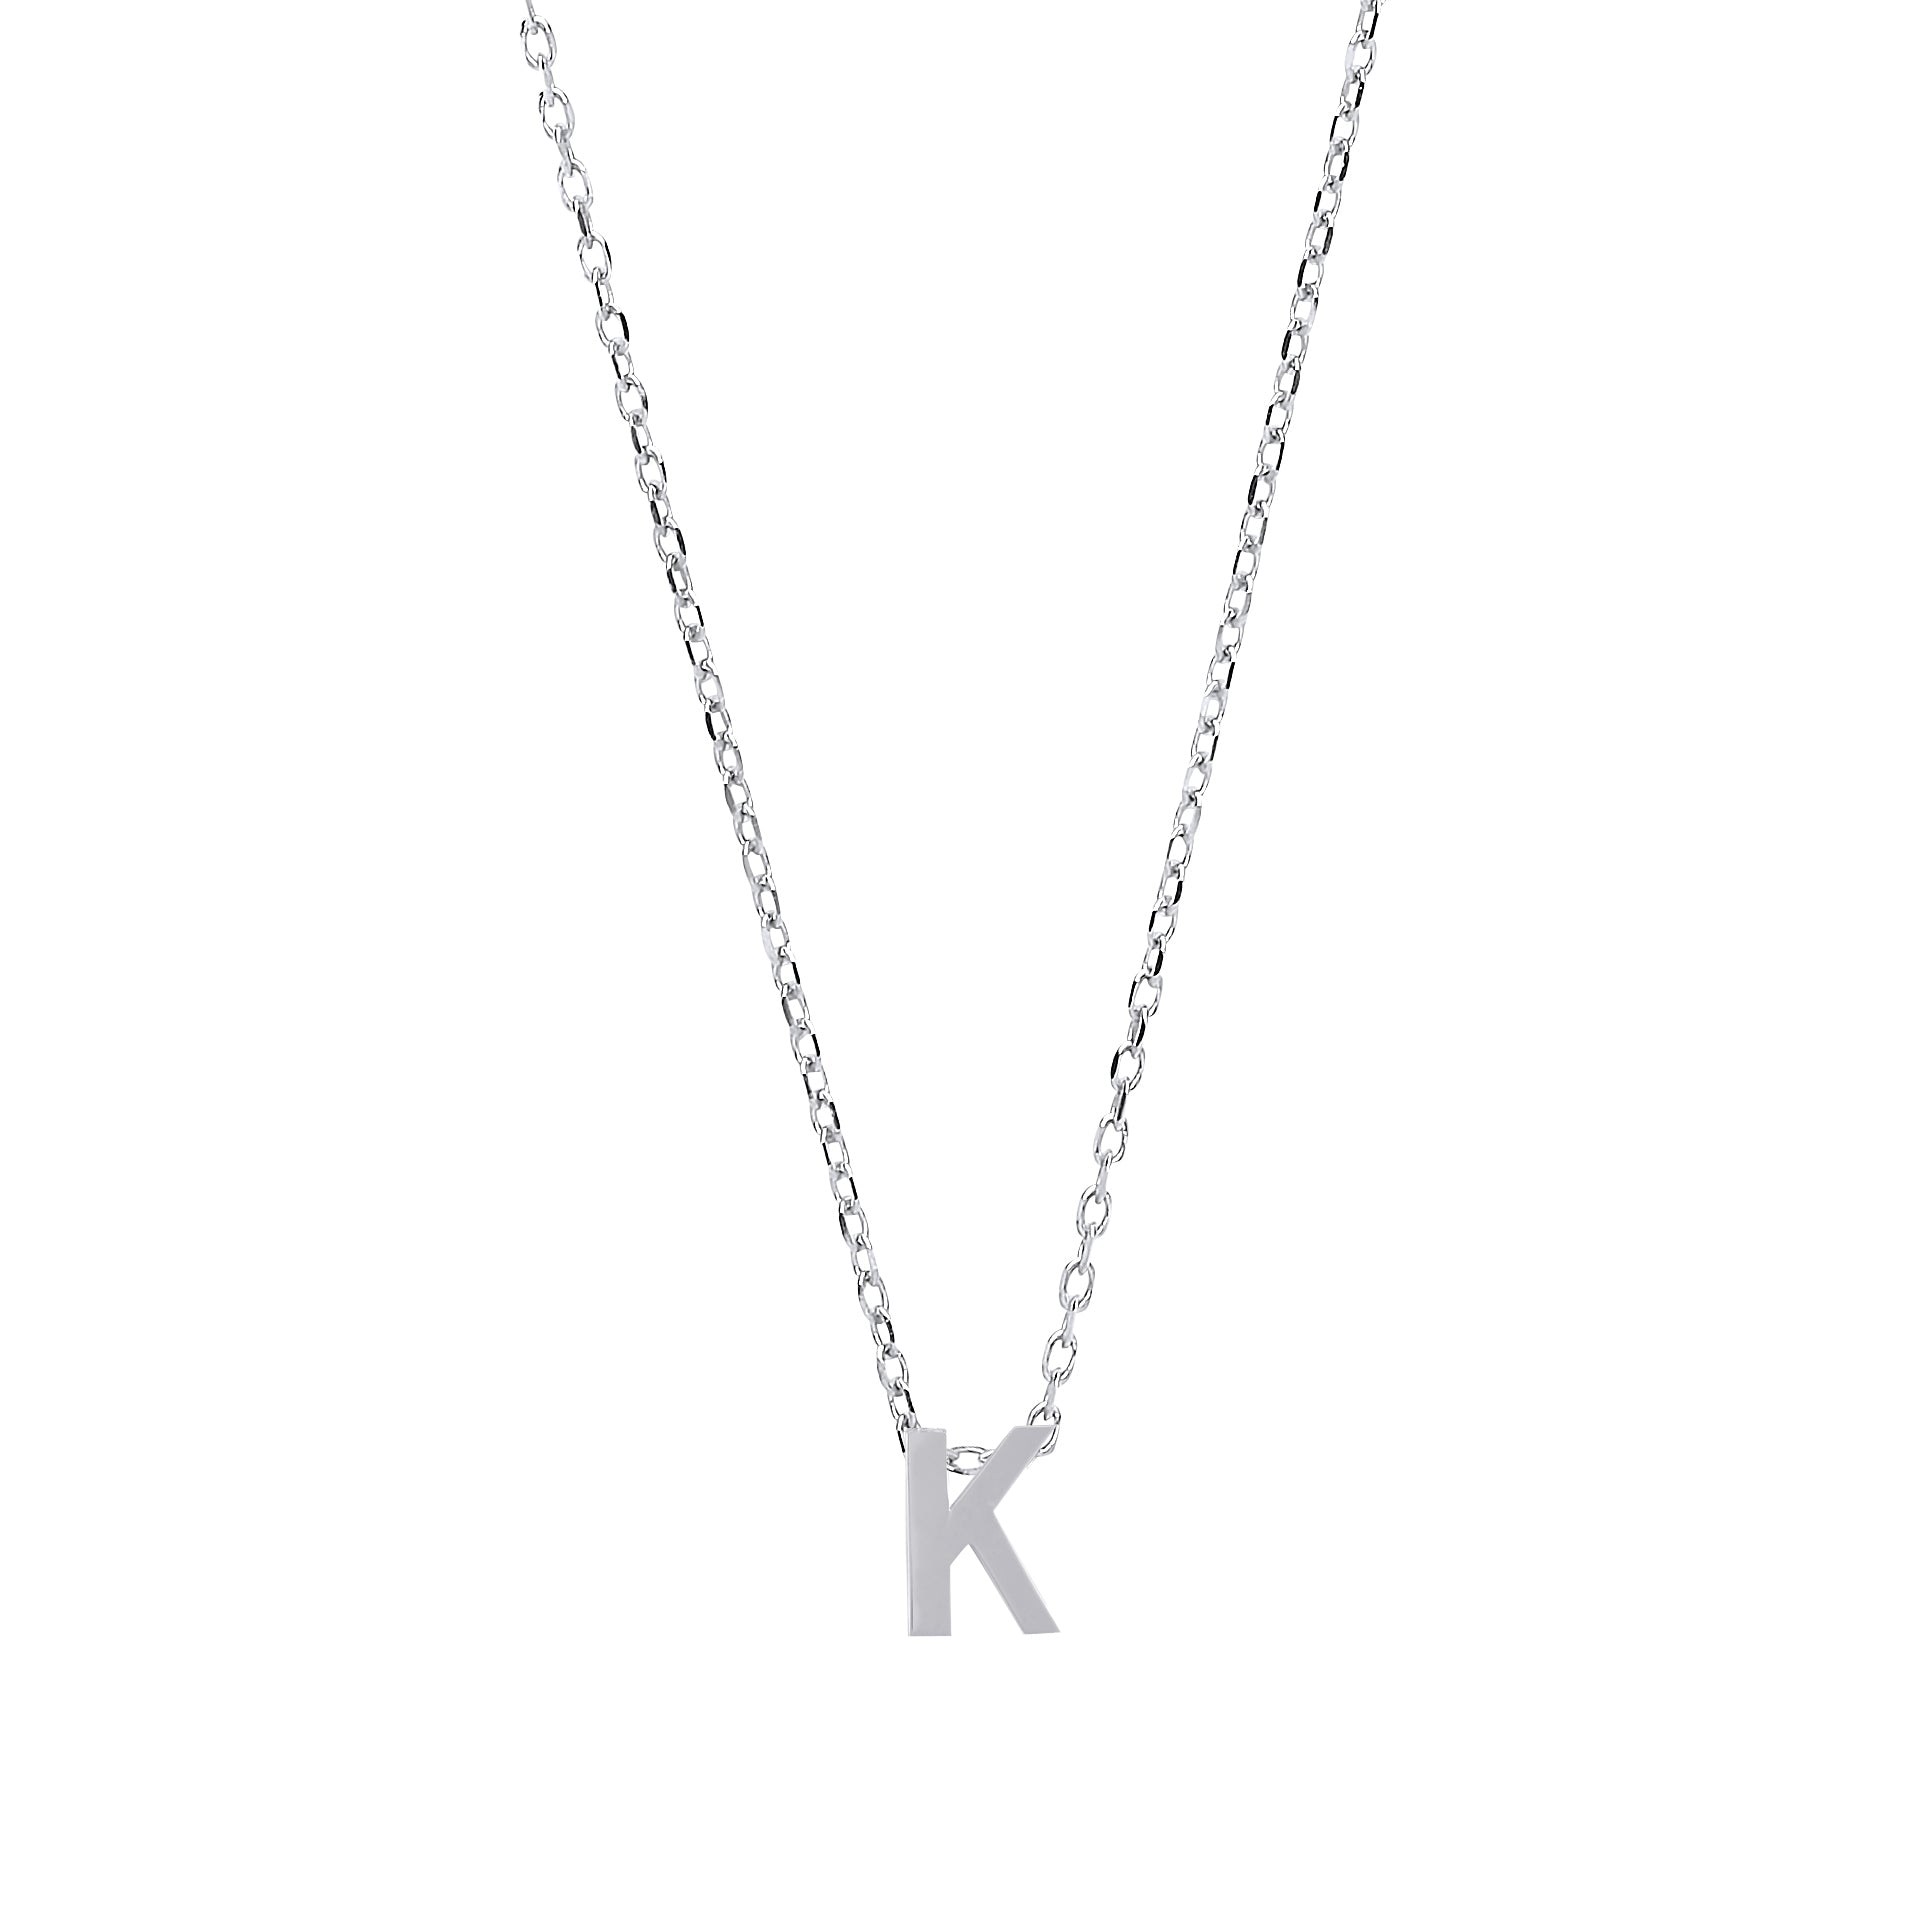 Silver  Letter K Initial Pendant Necklace 18 inch - GIN4K